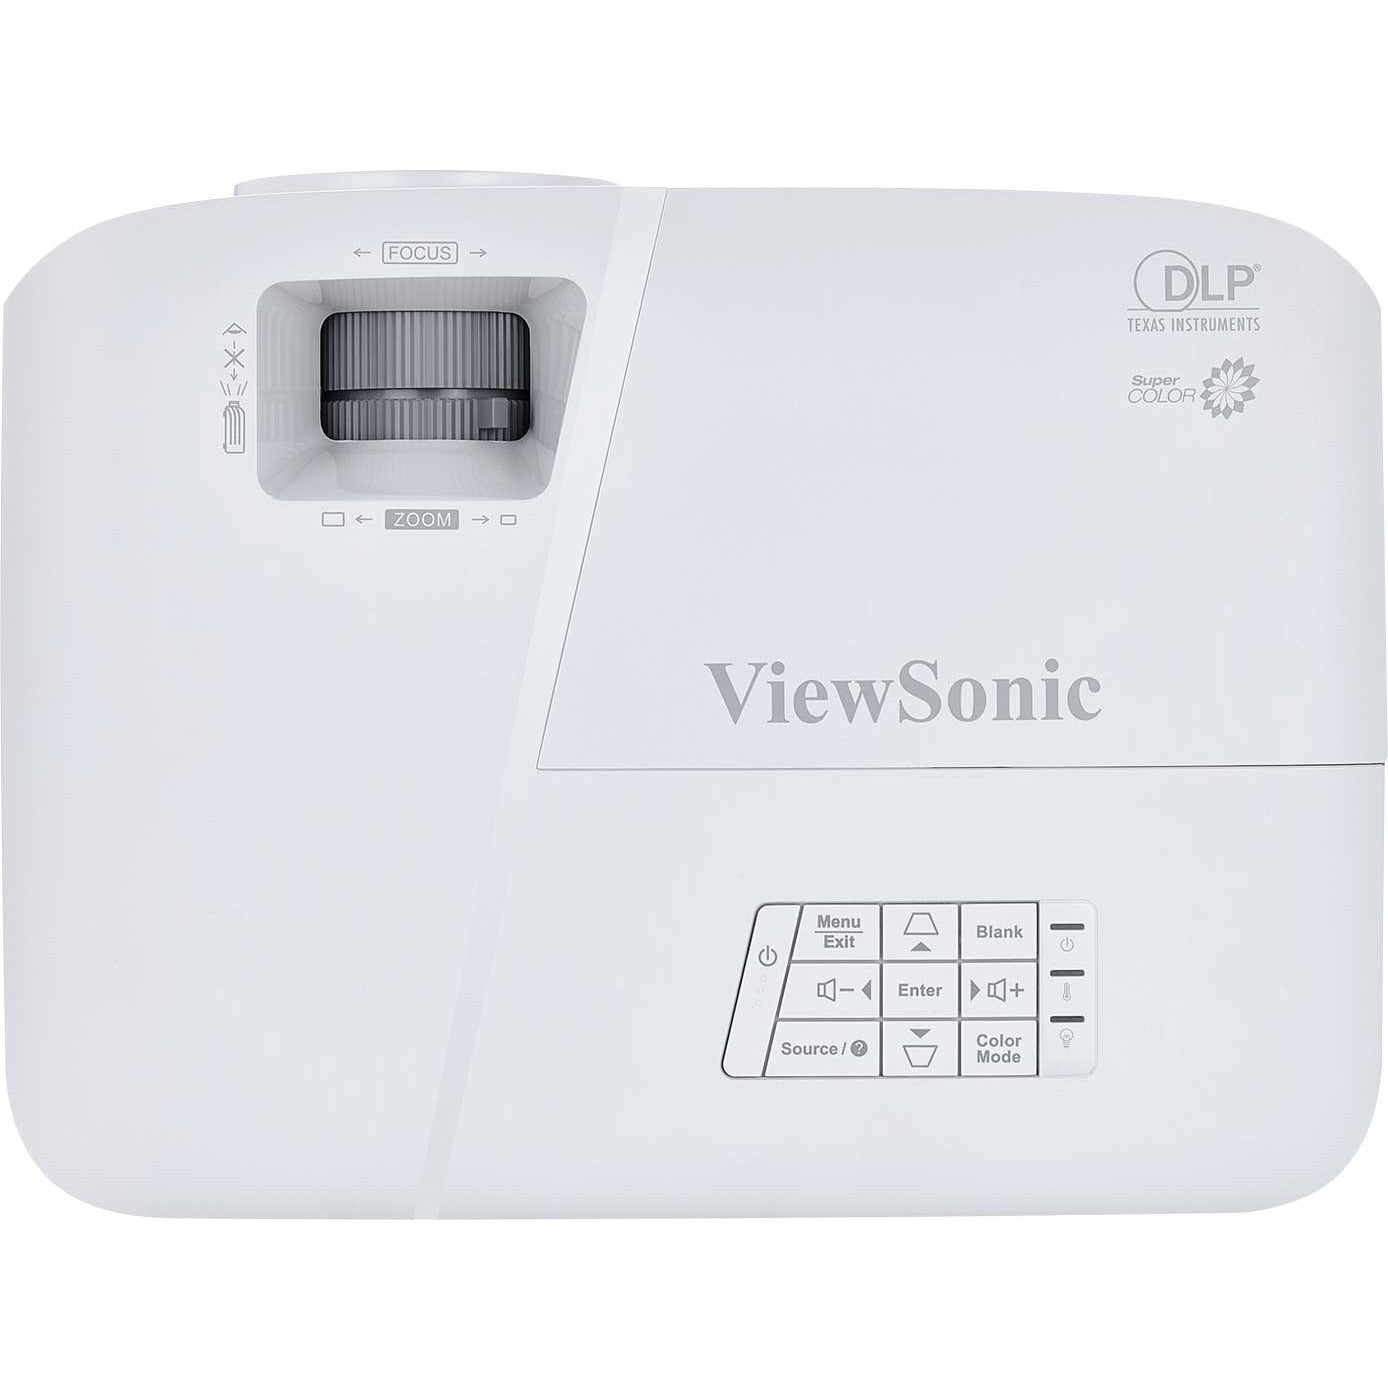 viewsonic-pa503s-3800-lumens-svga-high-brightness-projector-for-home-and-office-with-hdmi-vertical-keystone-pa503s-3800-lumens-svga-high-brightness-projector-with-hdmi-vertical-keystone_vewpa503s - 6